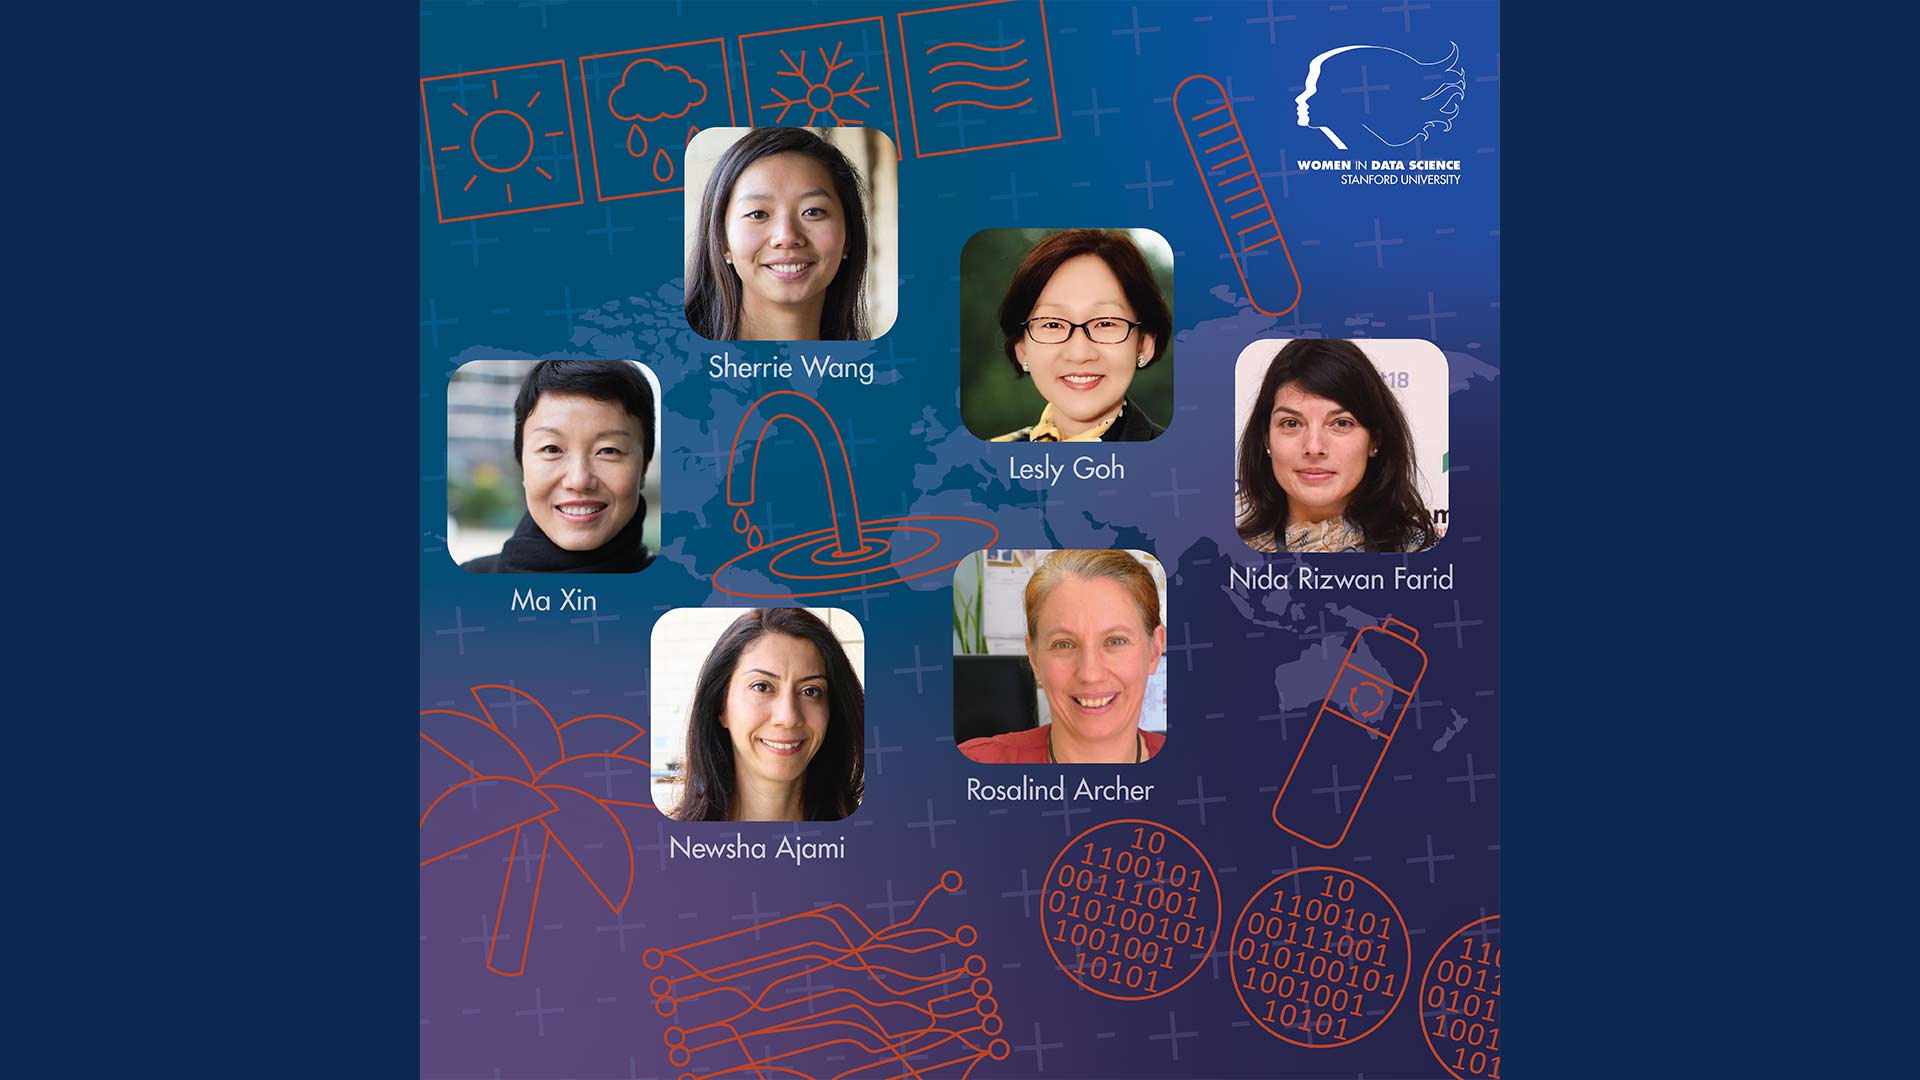 Photographs of Ma Xin, Sherrie Wang, Lesly Goh, Nida Rizwan Farid, Rosalind Archer, and Newsha Ajami. With WiDS branded illustrations in the background.